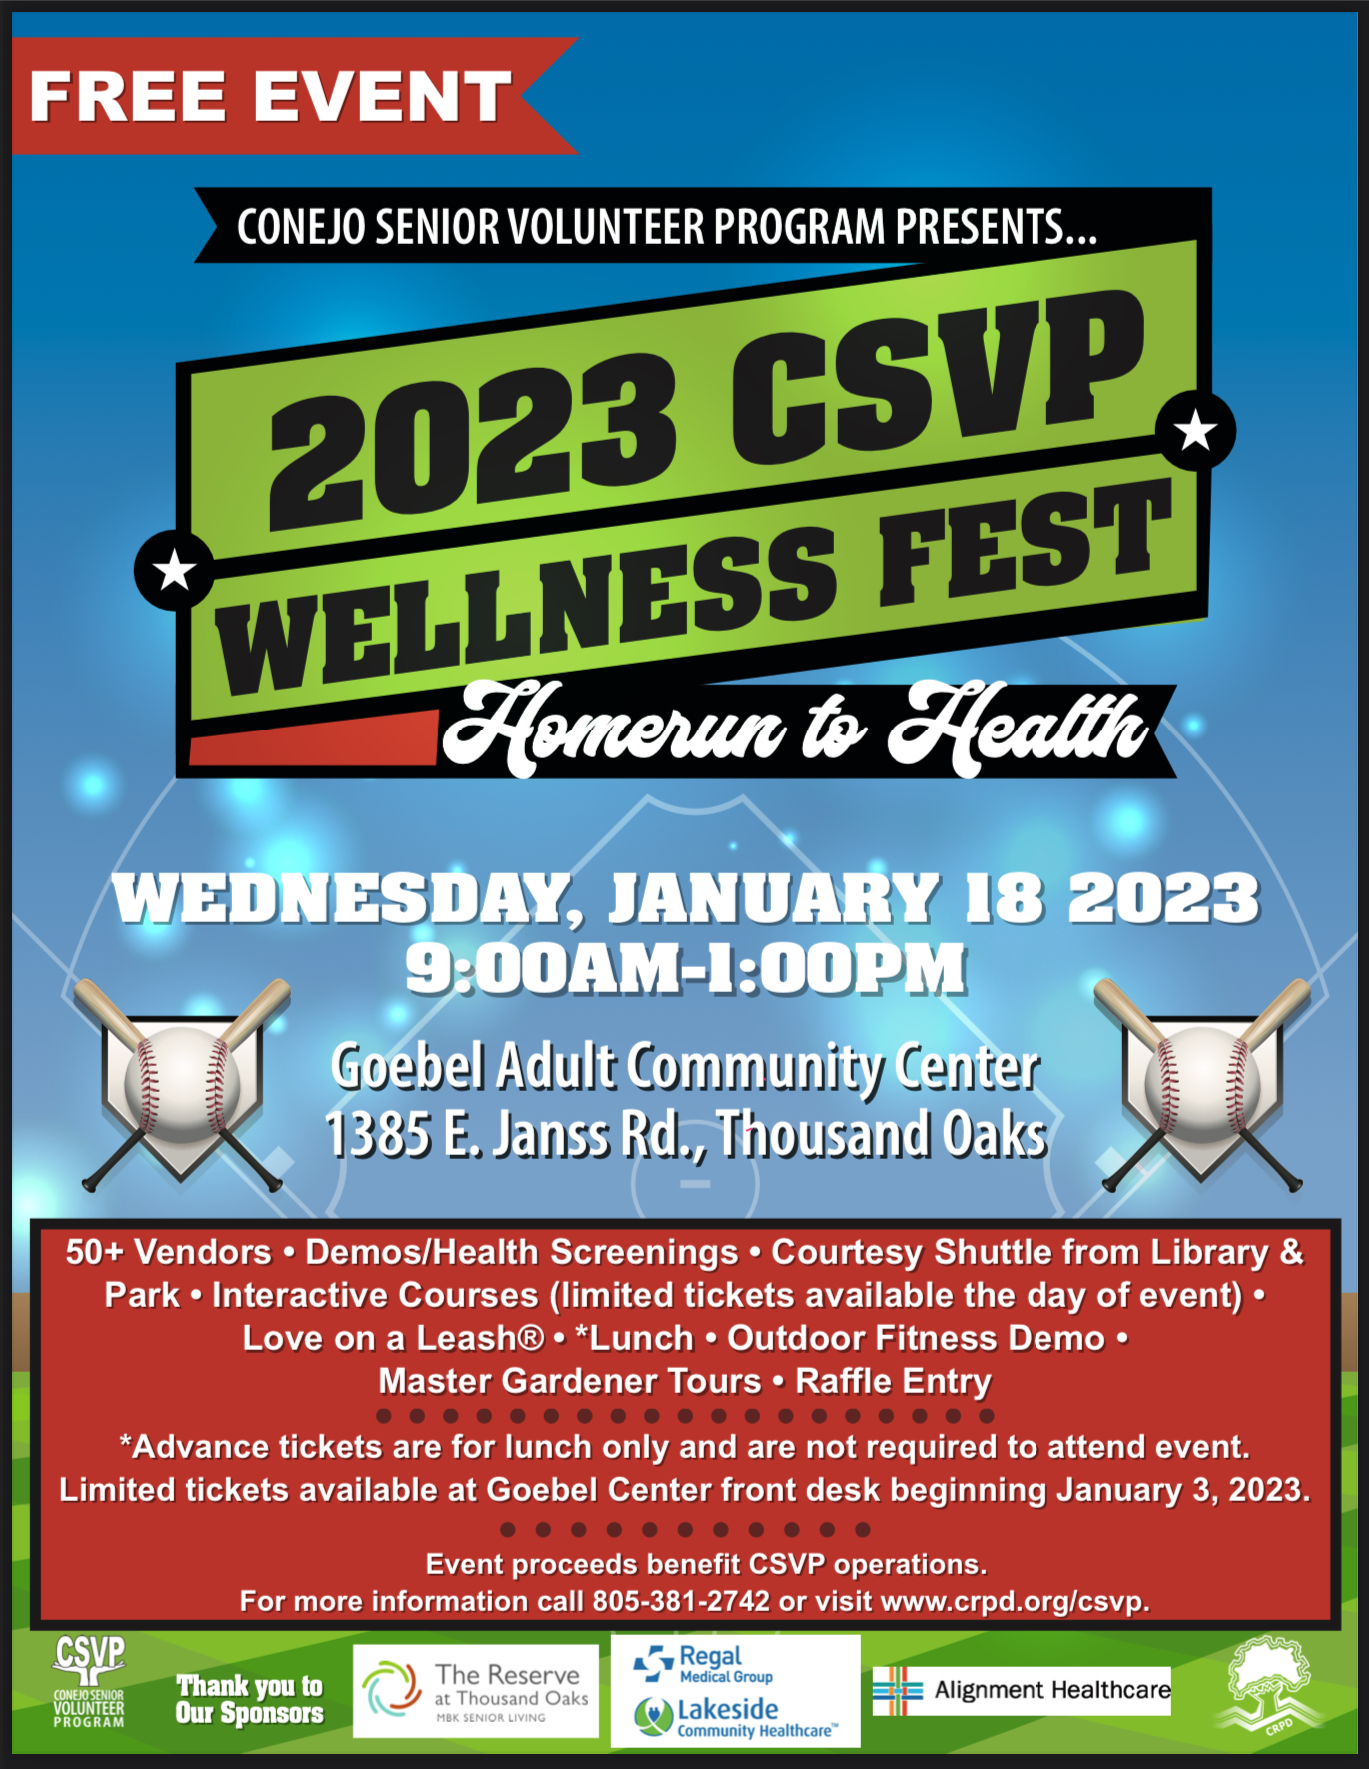 Hope you can join us at the CSVP Wellness Fest taking place Wednesday, January 18, 2023, from 9:00am-1:00pm.  This event gathers 40+ local businesses and public service agencies into one location, providing Conejo Valley residents with valuable information on health, wellness, and much more.
 
Vendors include care facilities, local nonprofits, the City of Thousand Oaks, legal/insurance businesses, nutrition/fitness/wellness opportunities, and recreation/entertainment options.  The event incorporates “Interactive Courses” which will be offered throughout the day.  We are also very excited to showcase our brand-new outdoor fitness area! 
 
This is a FREE event.